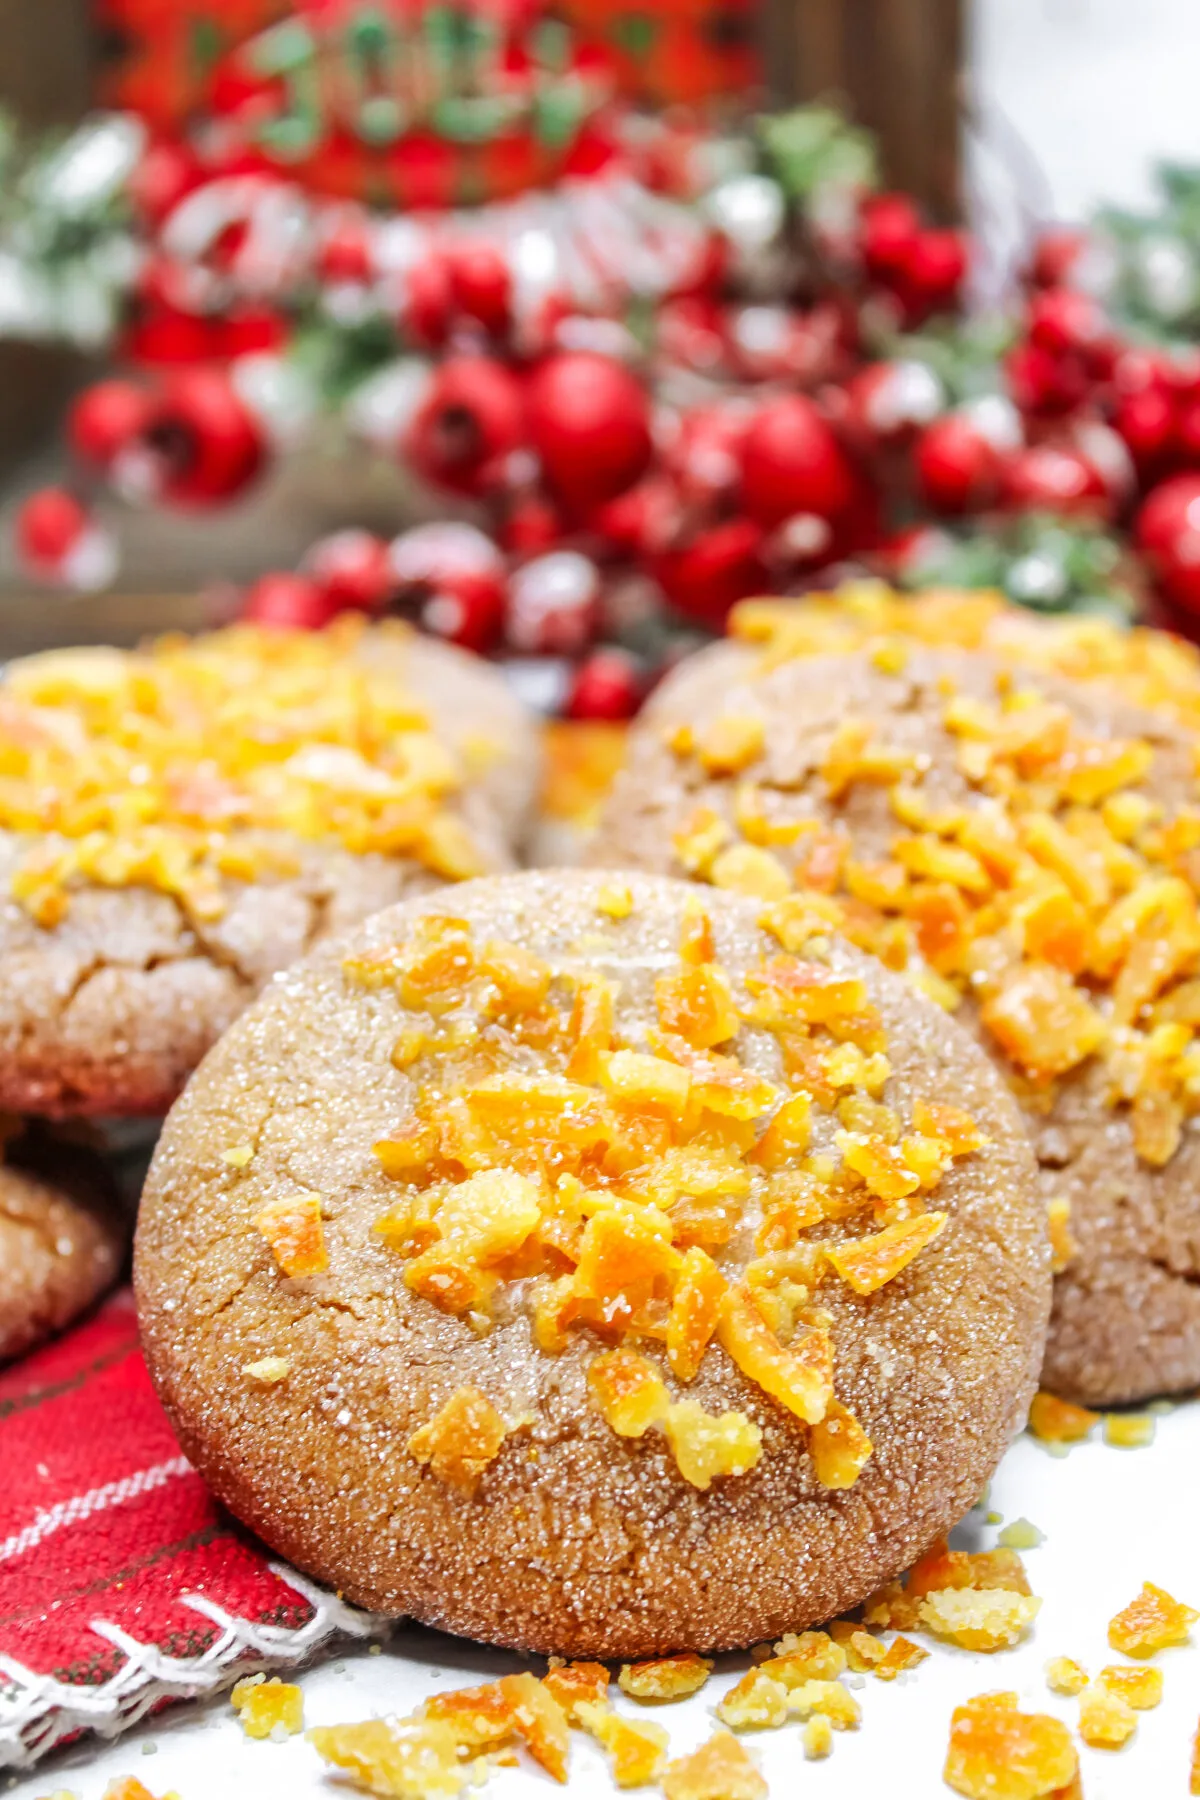 Looking for a delicious, festive cookie recipe to make this holiday season? Try these Candied Orange Ginger Cookies for your dessert table.